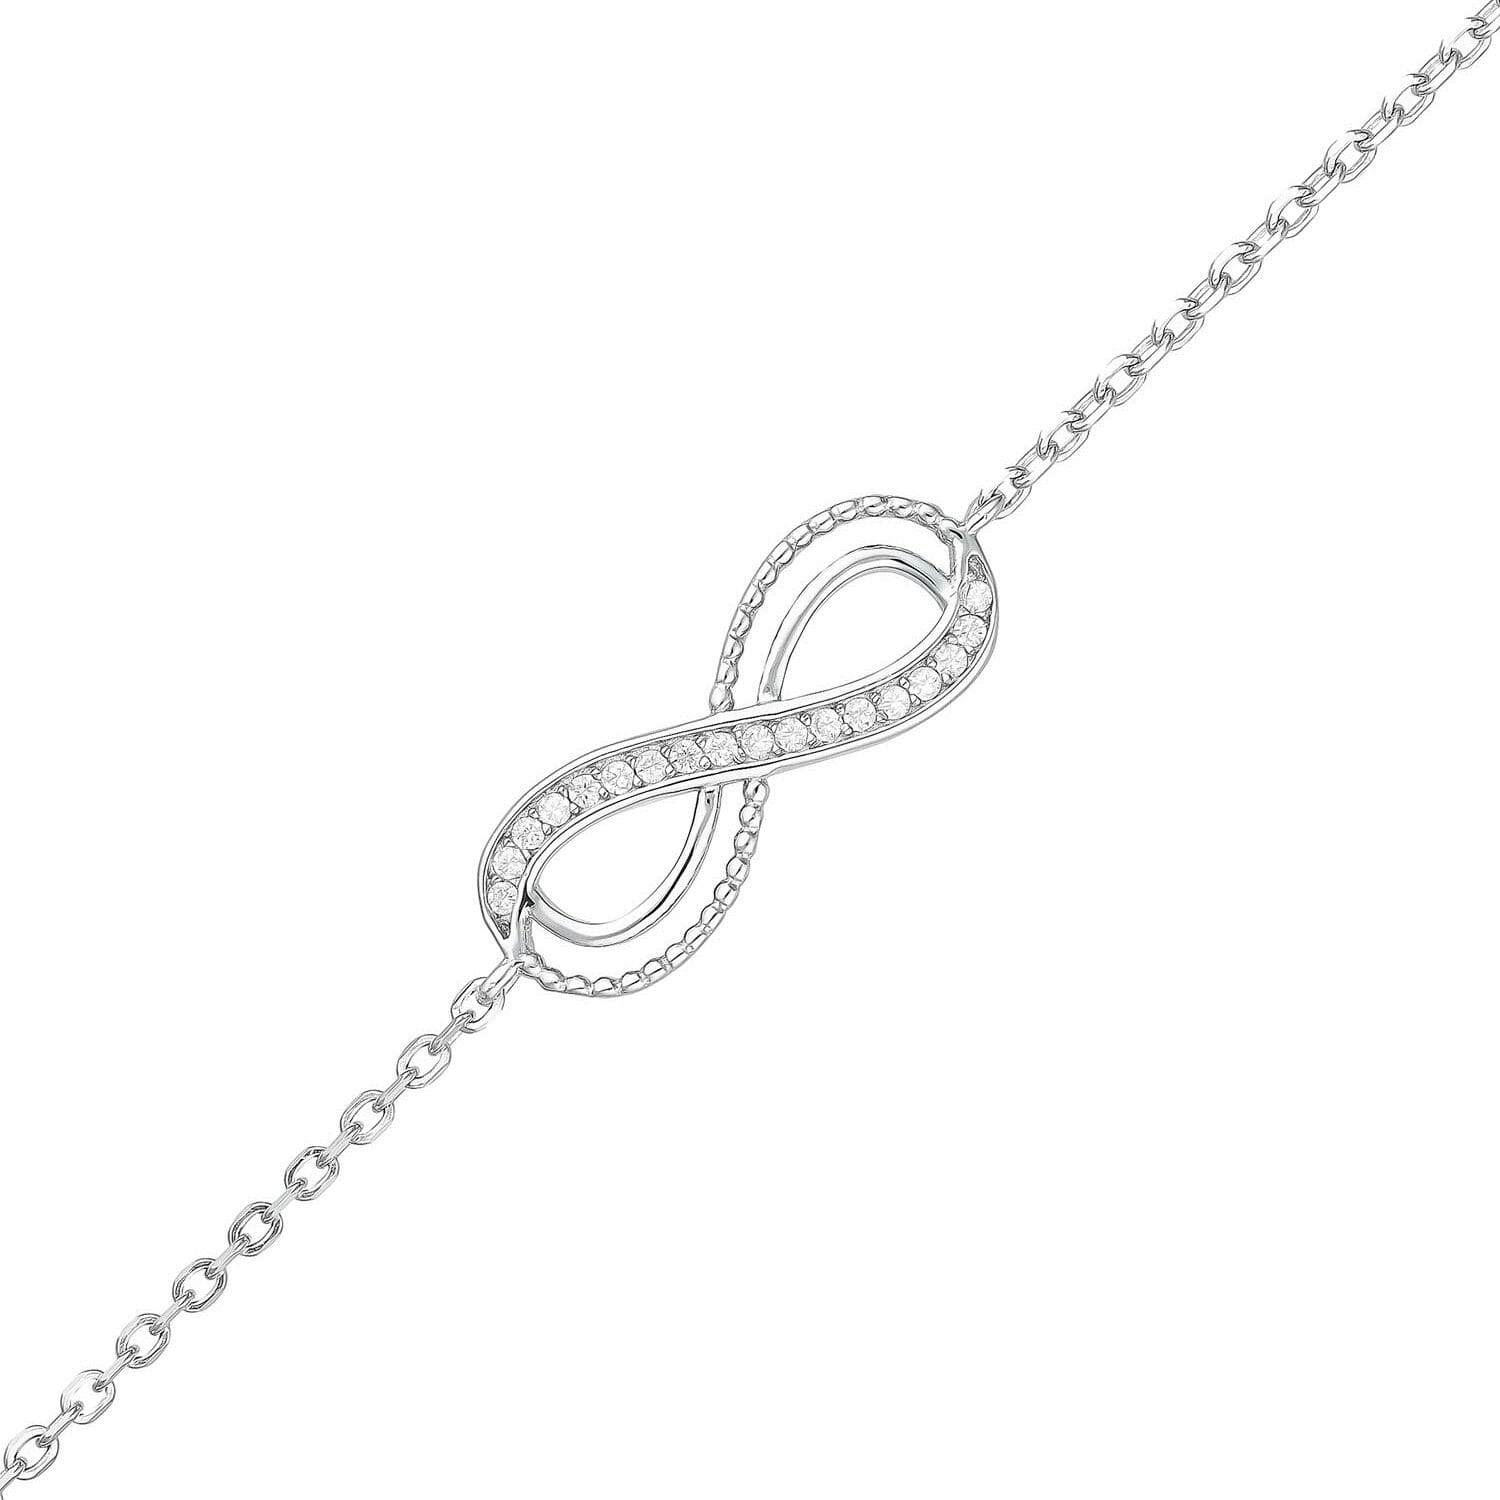 Rhodium Plated Sterling Silver Infinity Cubic Zirconia Bracelet